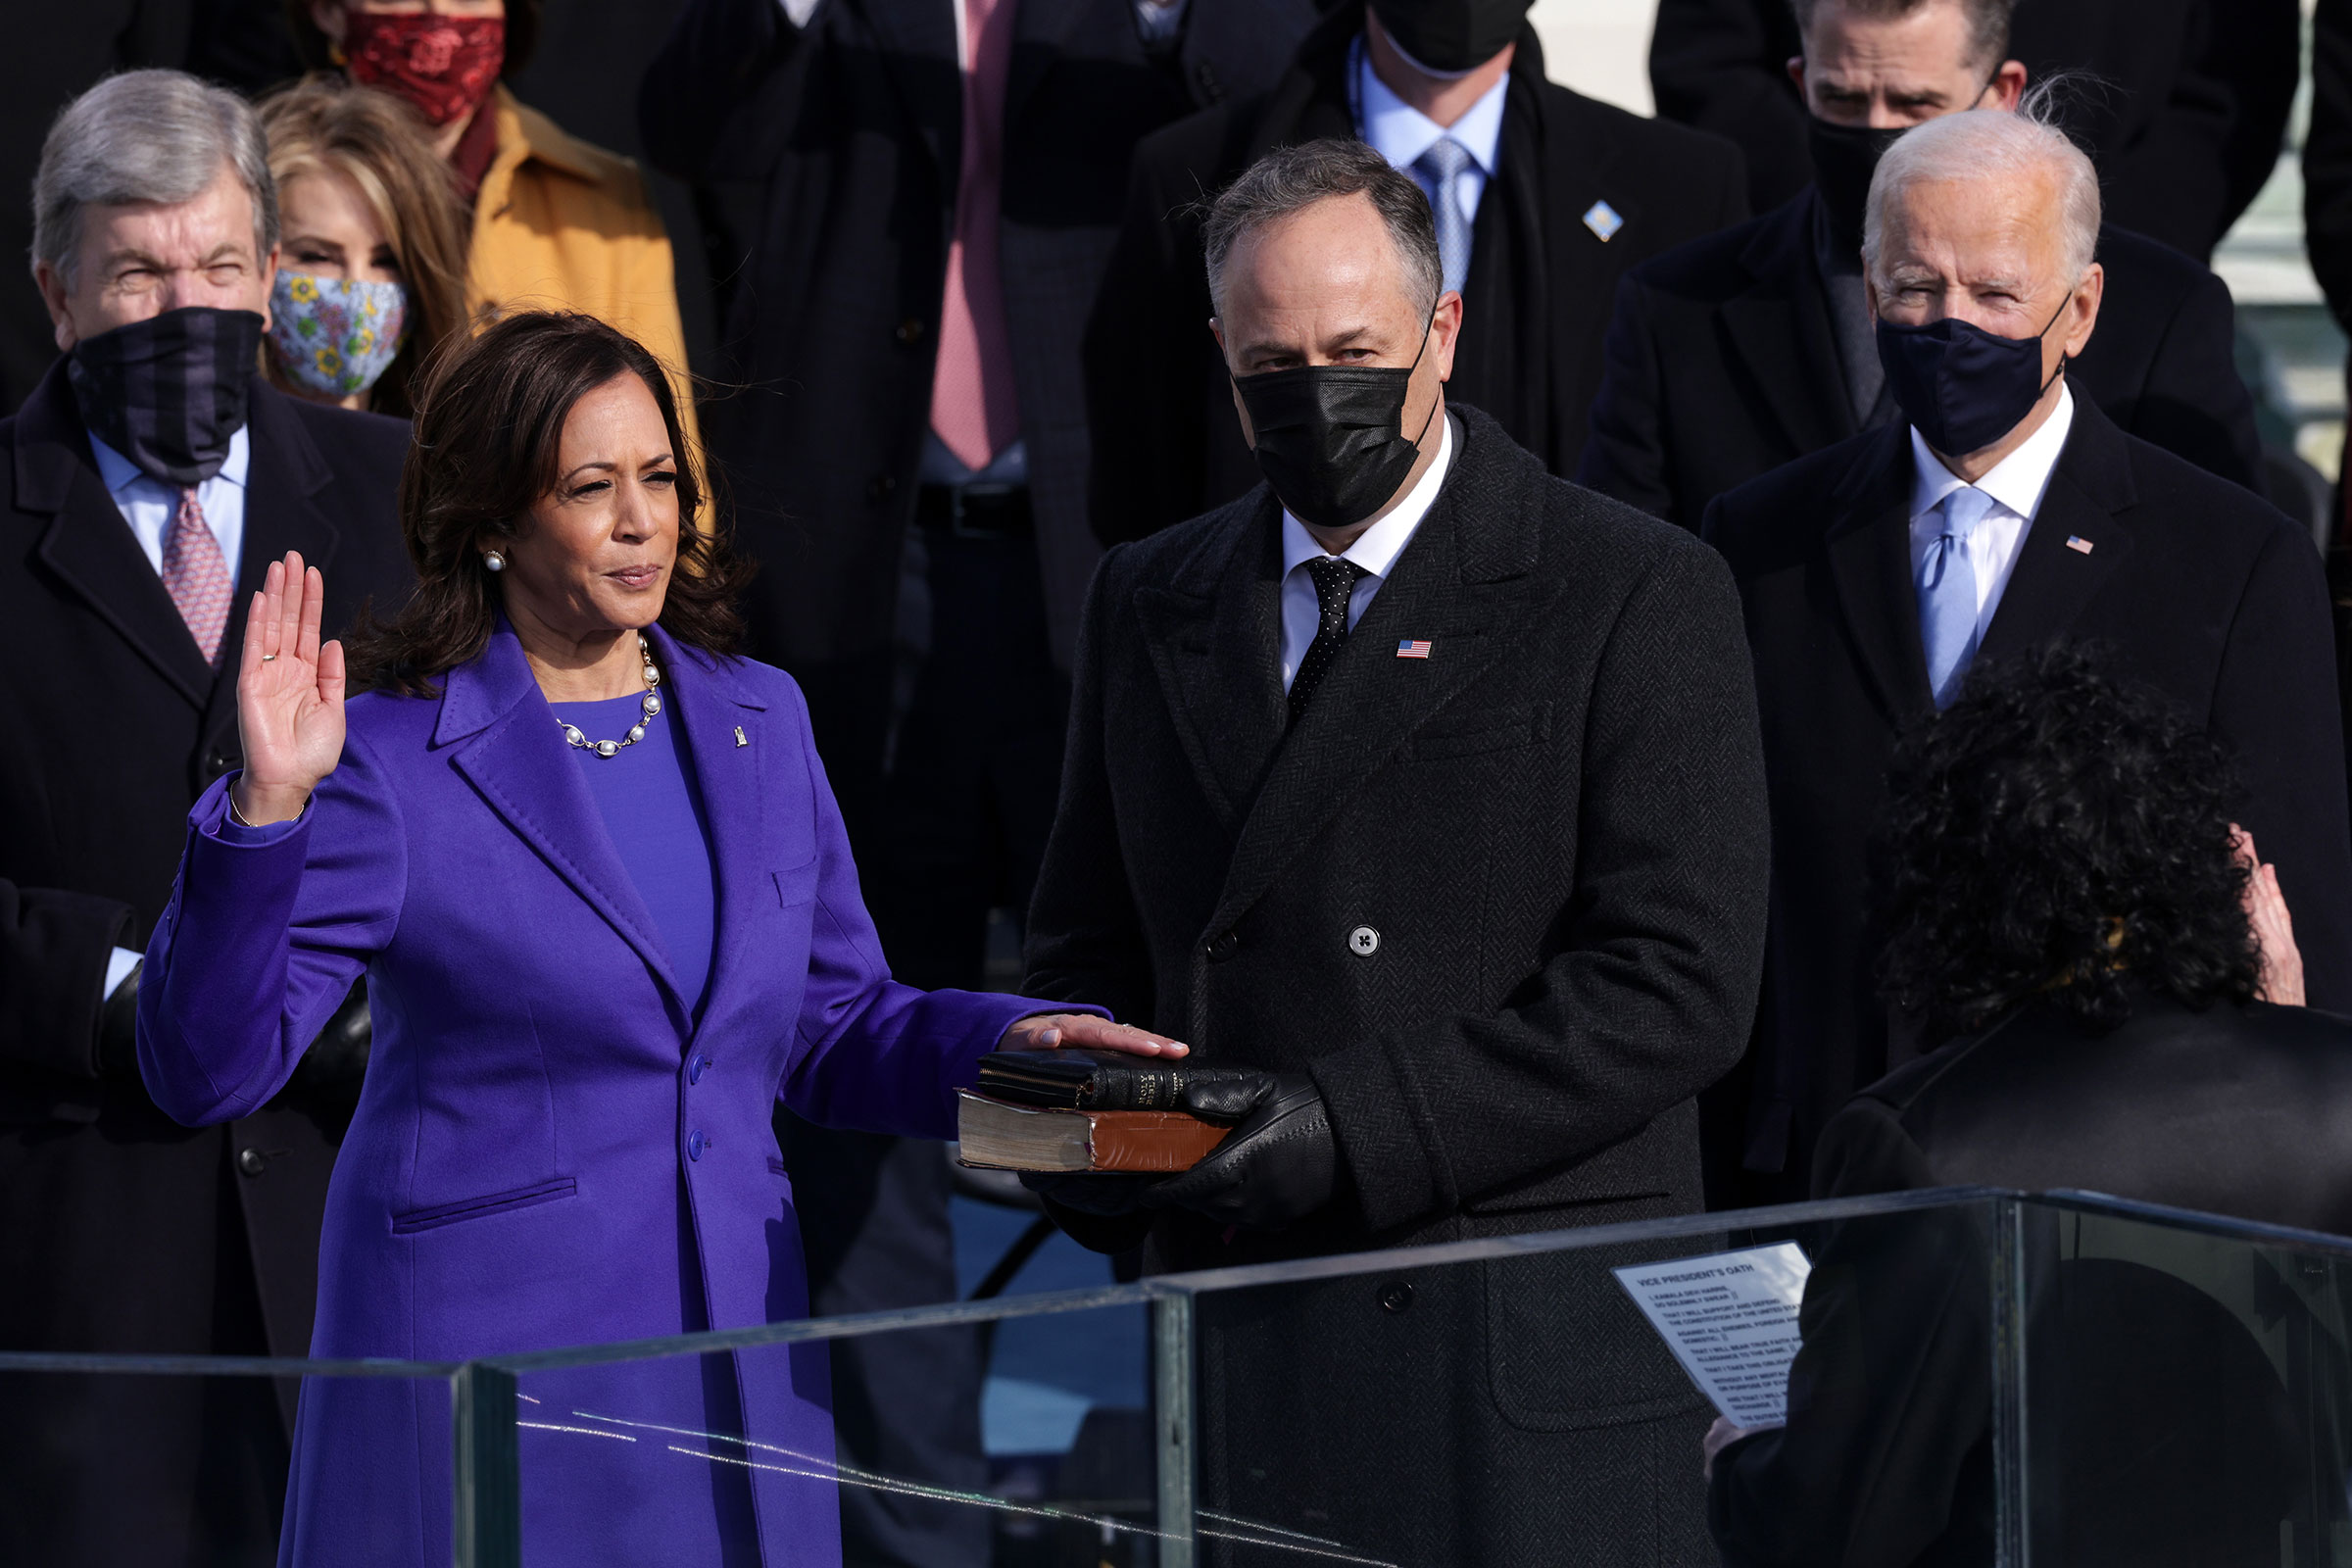 Kamala Harris is sworn in as Vice President of the United States as her husband Doug Emhoff looks on, in Washington on Jan. 20, 2021. (Alex Wong—Getty Images)